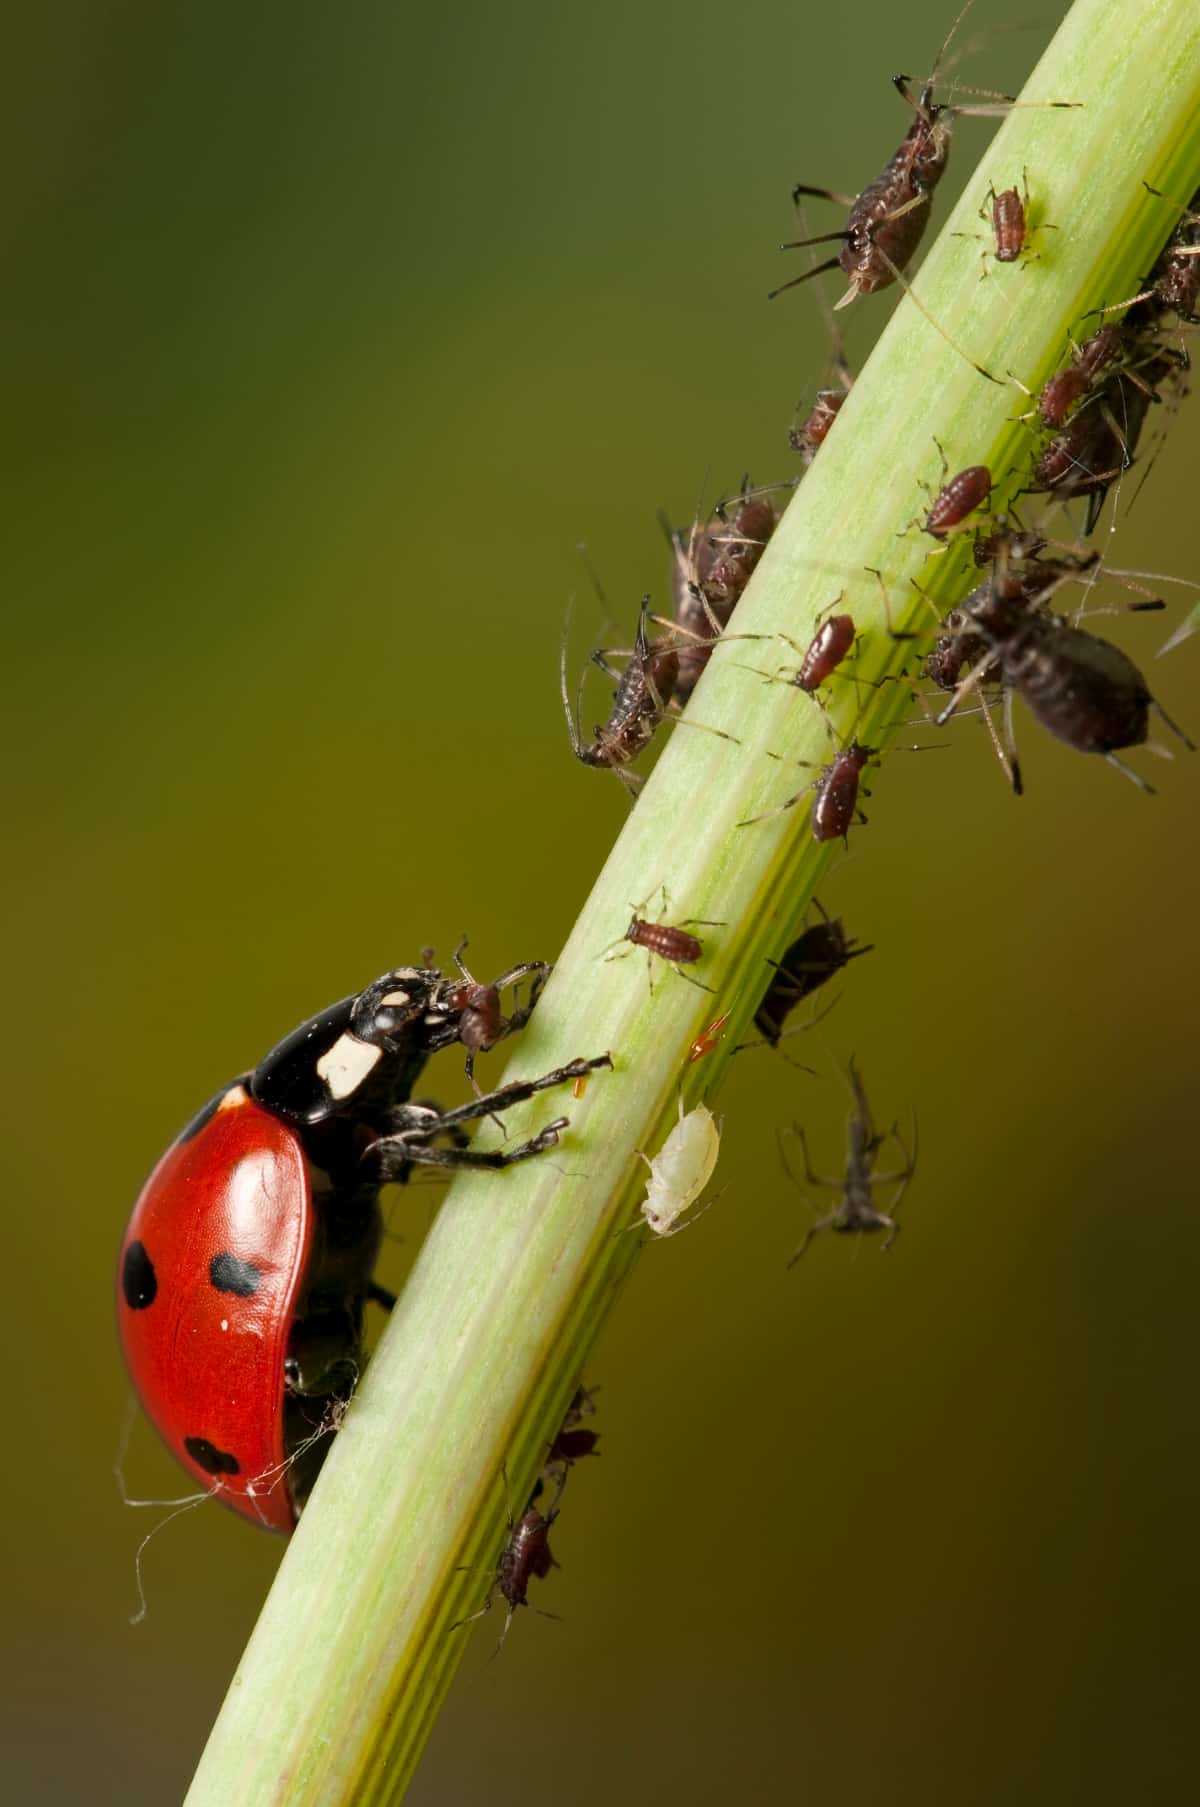 Ladybird Eating Aphids